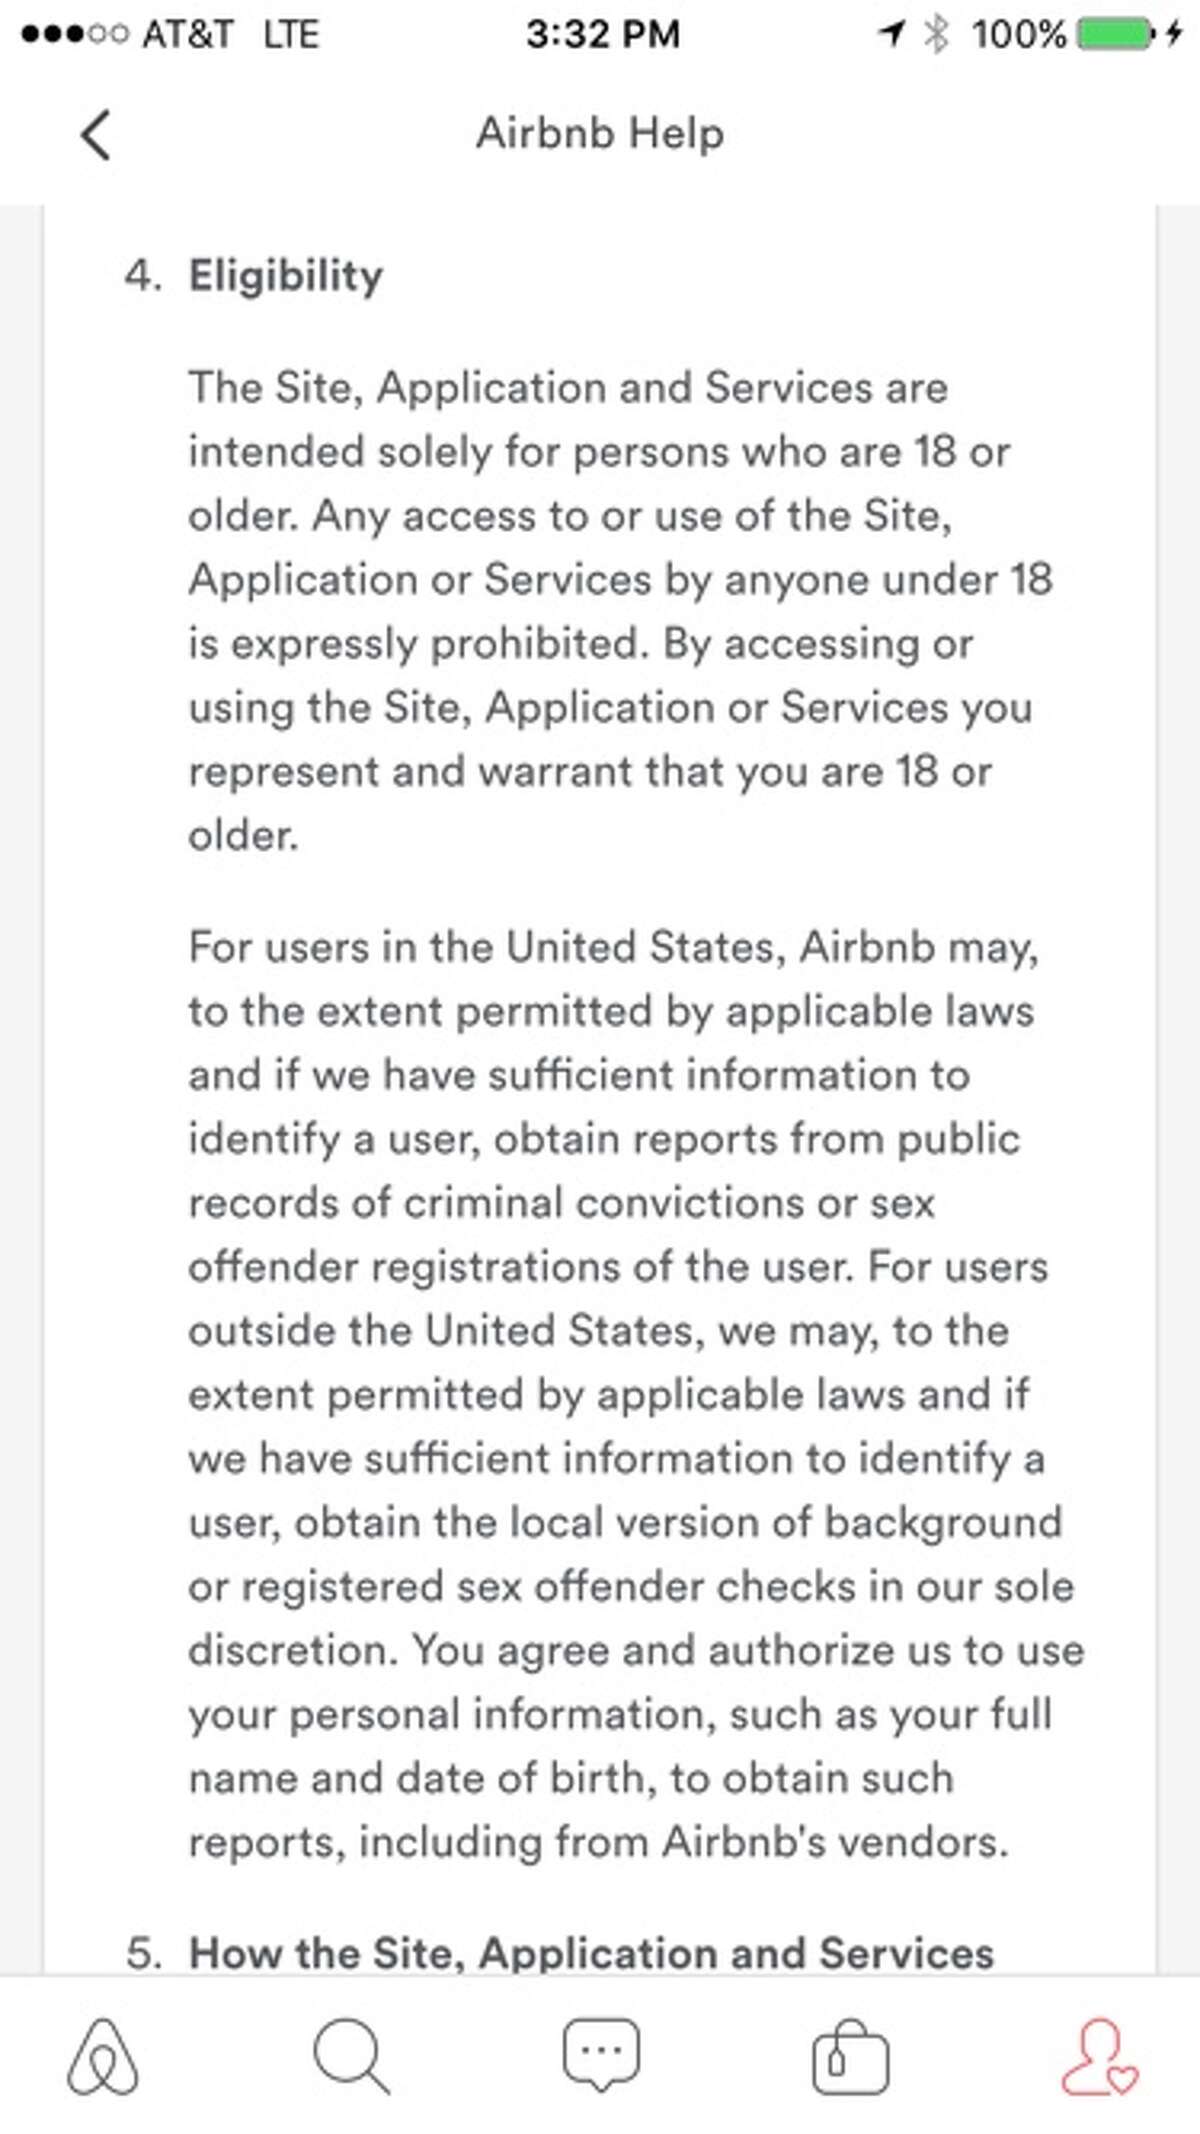 The Airbnb app now displays updated terms of service seeking users’ permission to perform background checks.